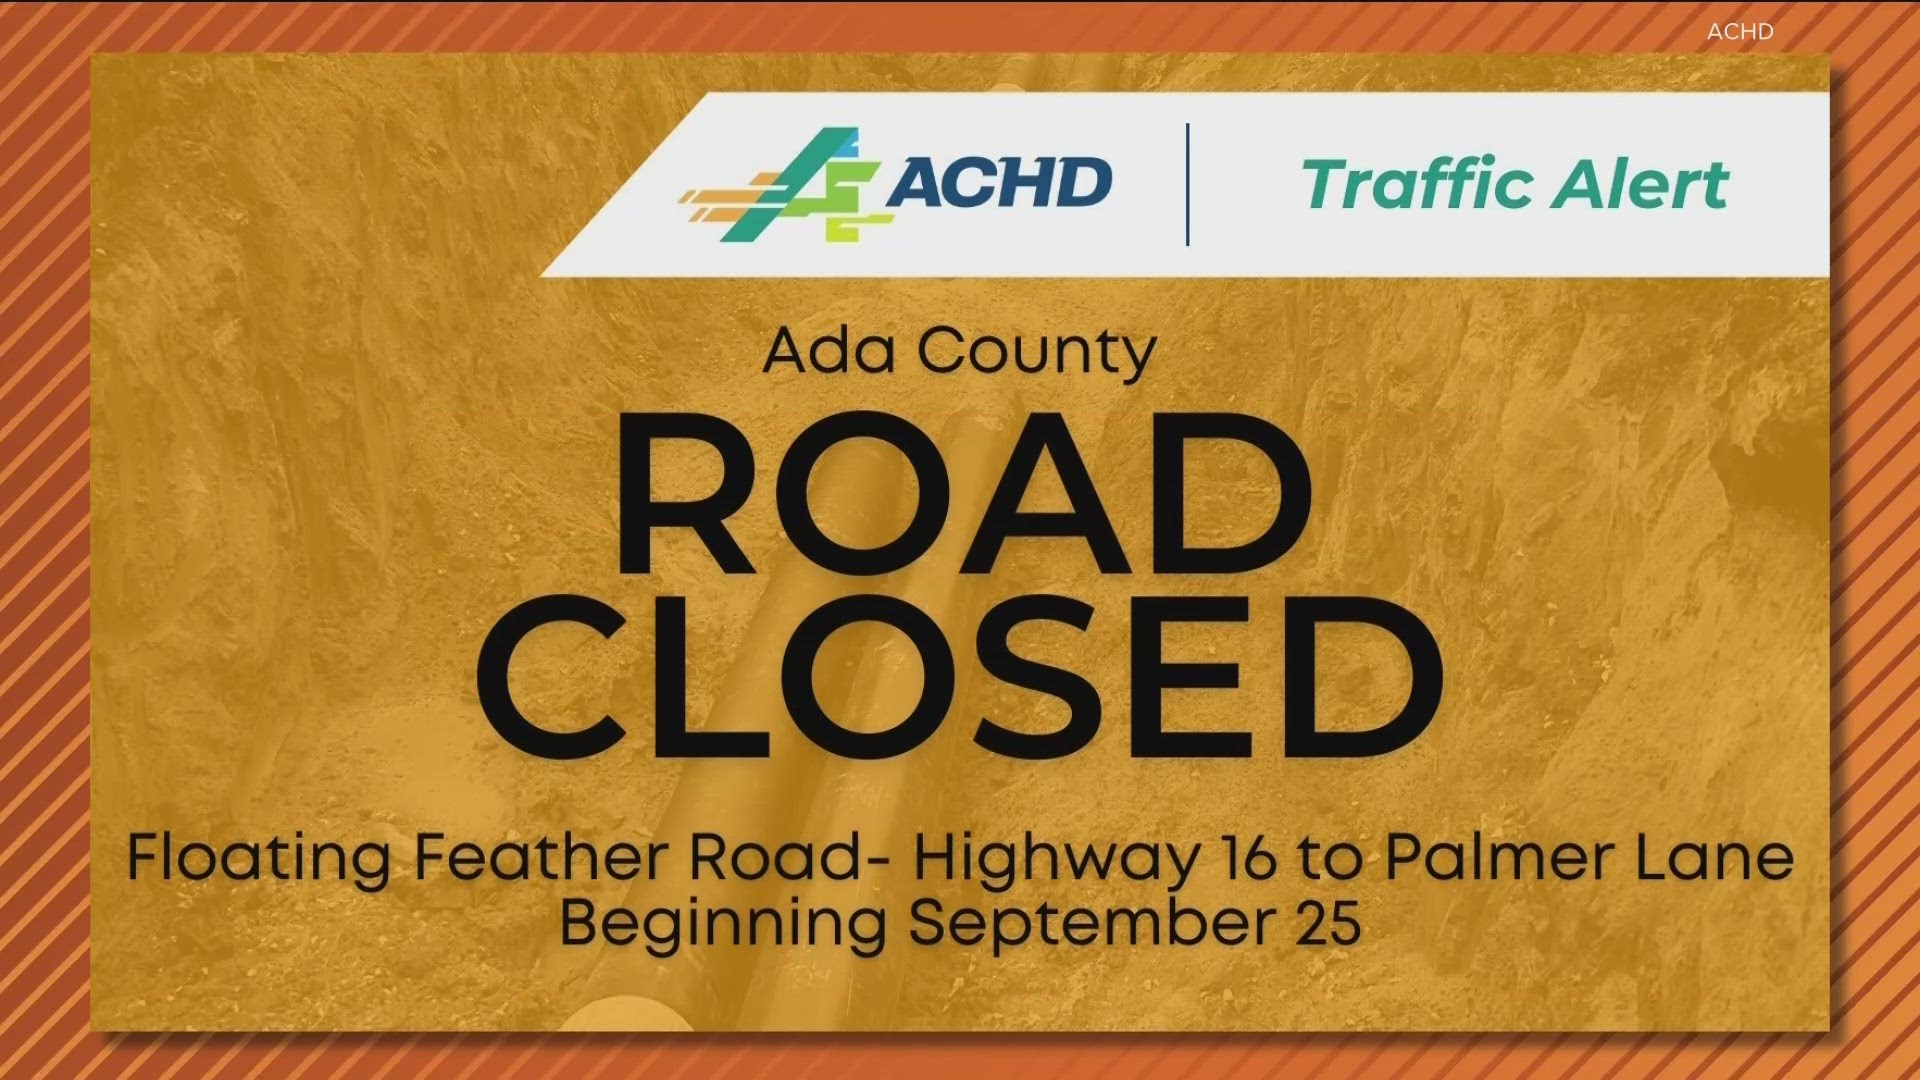 Floating Feather road will be closed between Highway 16 and Palmer Lane. It should be reopen on Sept. 28.